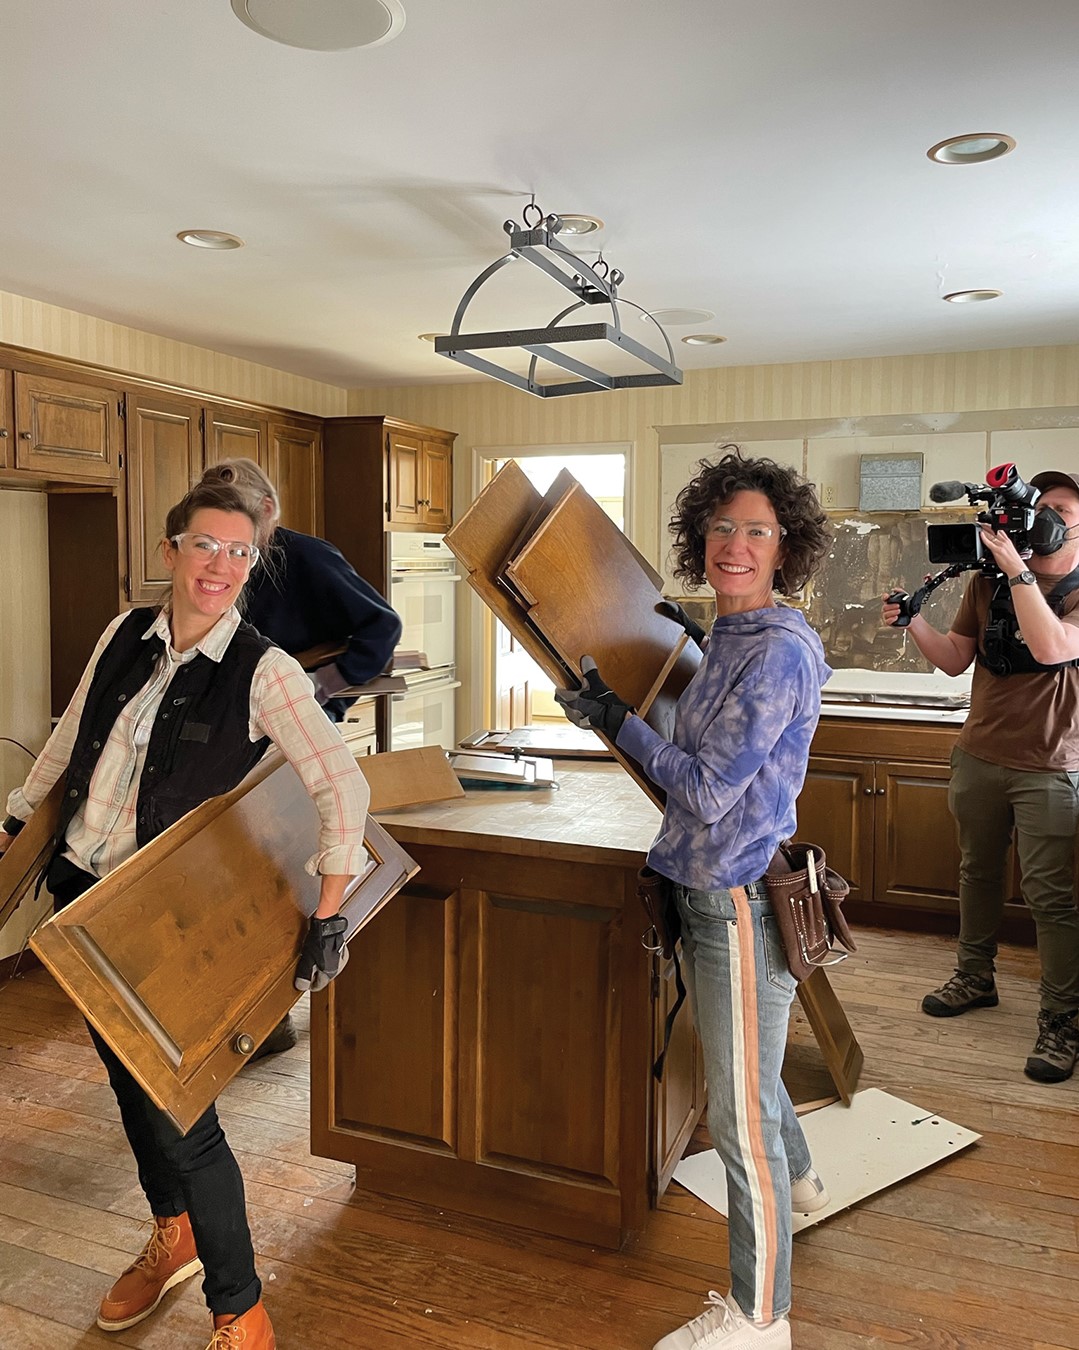 Kirsten Meehan and Lindsey Uselding filming an episode about the home of their colleague and his wife, Ron and Sonia Ungerman. The home had ice dams that caused water damage throughout the house. 